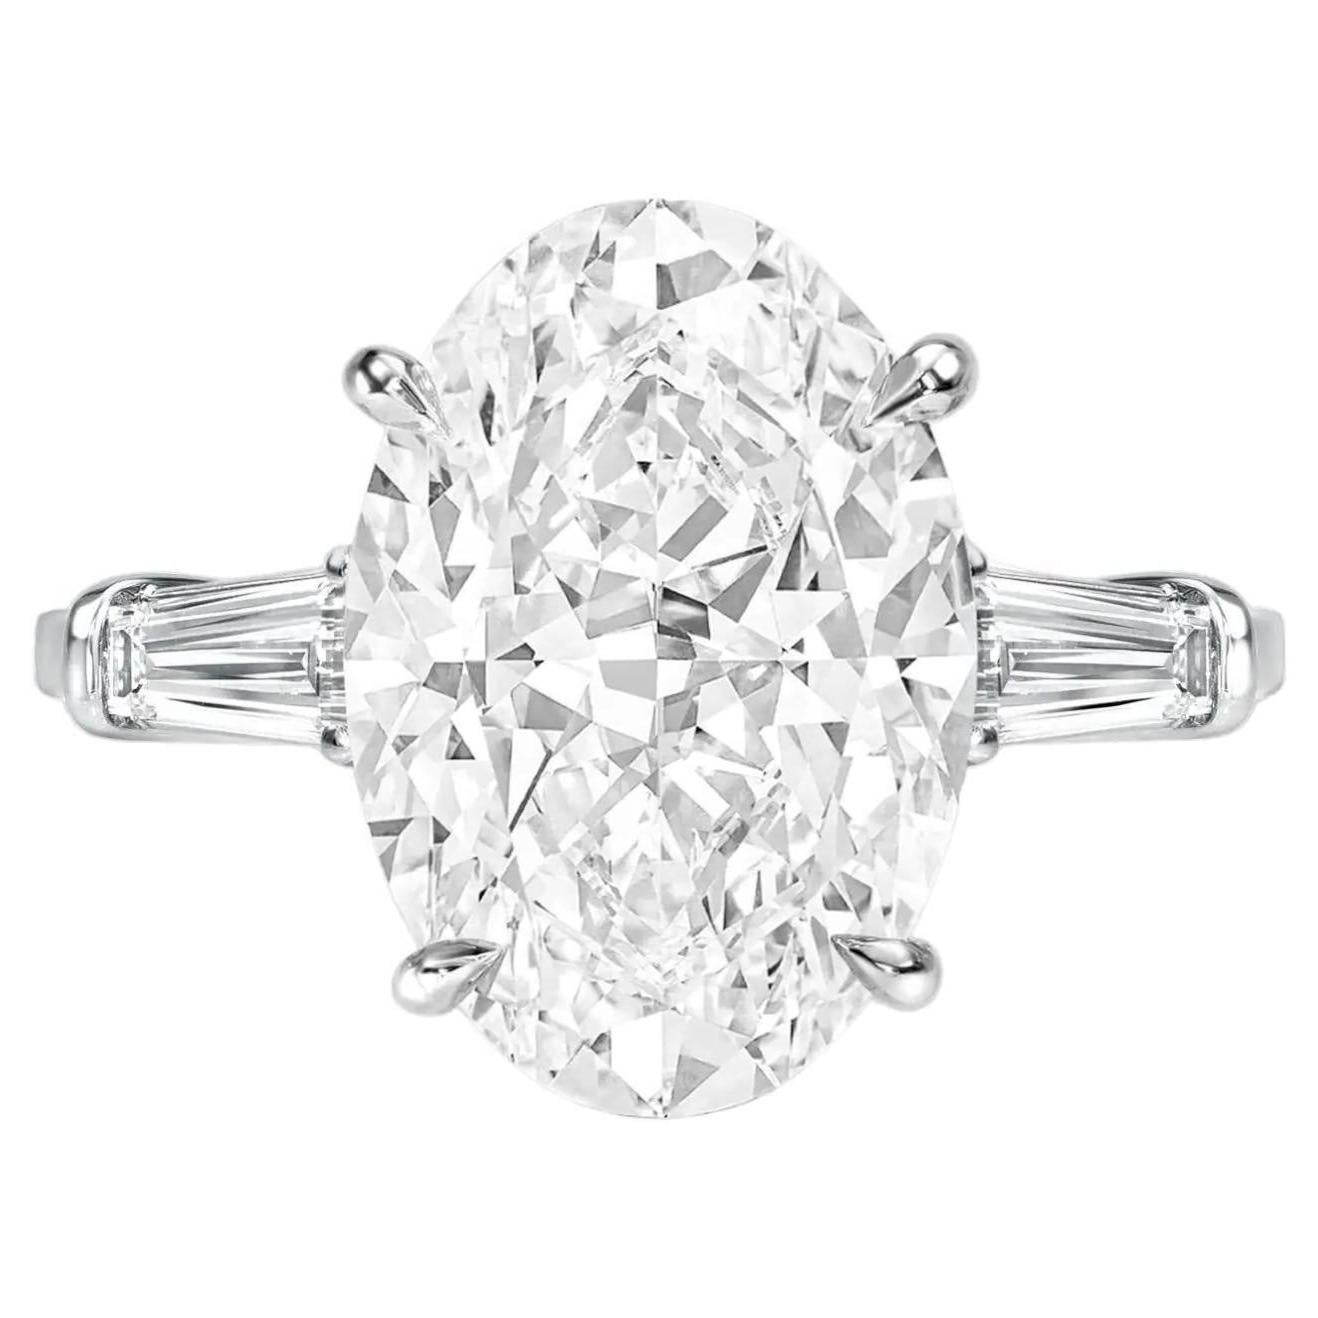 Introducing the stunning GIA Certified 4 Carat Oval Diamond Platinum Ring, elegantly complemented by tapered baguette diamonds. At the heart of this exquisite ring shines a mesmerizing oval-cut diamond, certified by the esteemed Gemological